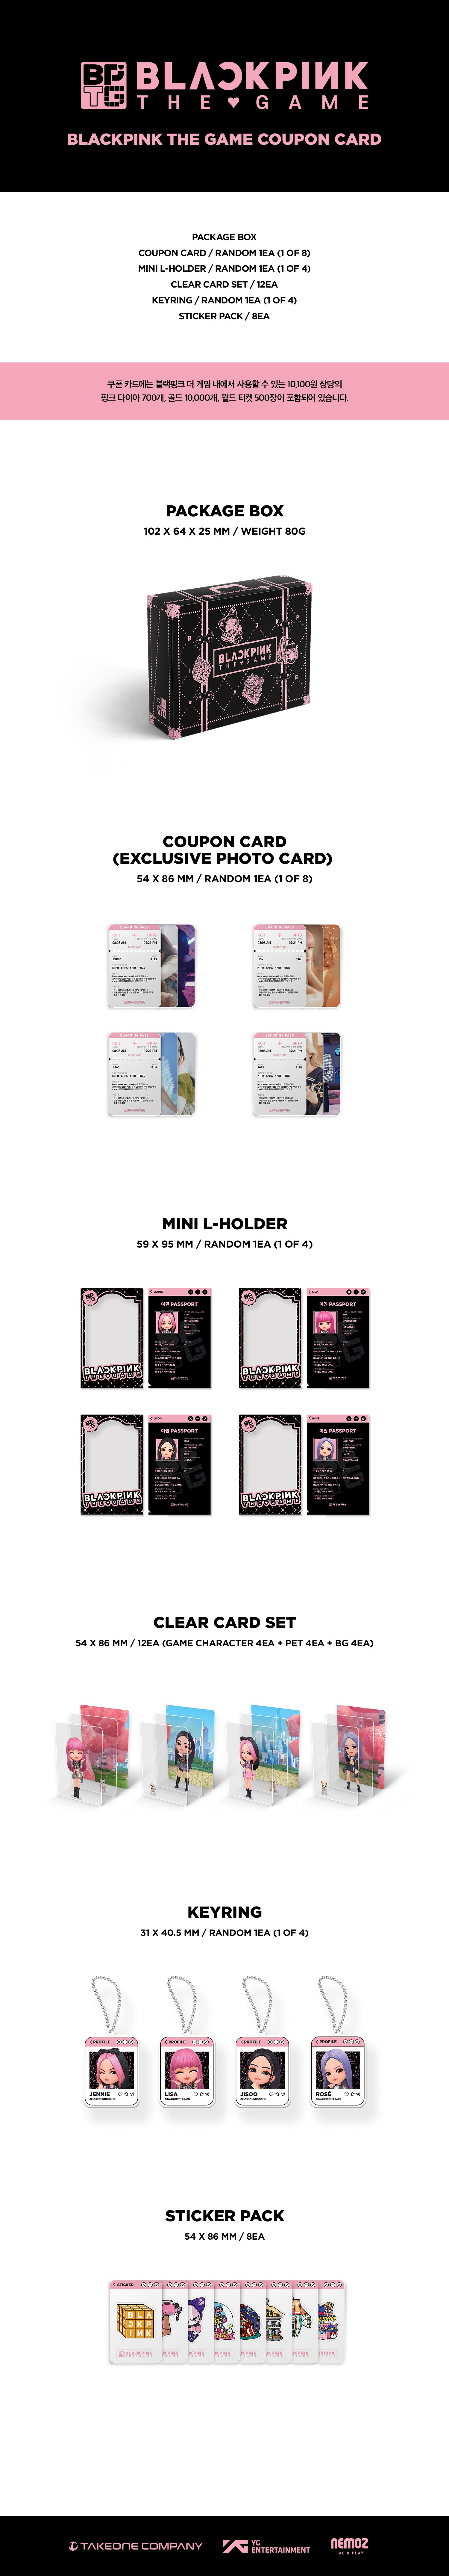 BLACKPINK THE GAME COUPON CARD DETAIL